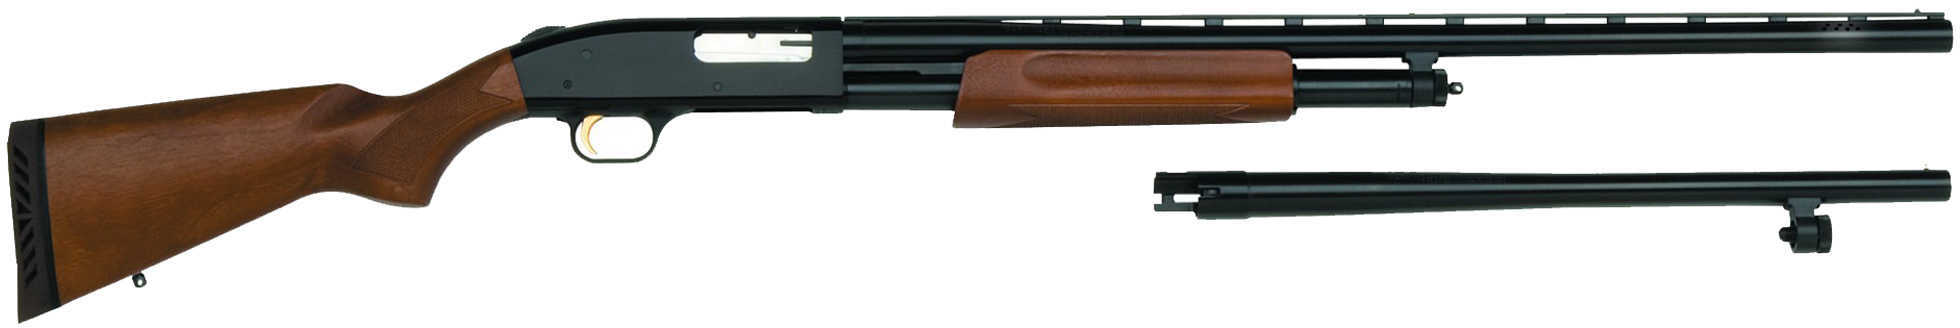 Mossberg 500 Combo 12 Gauge 26" Vented Rib Barrel and 24" Smooth Barrel With Package Kit Shotgun 54169